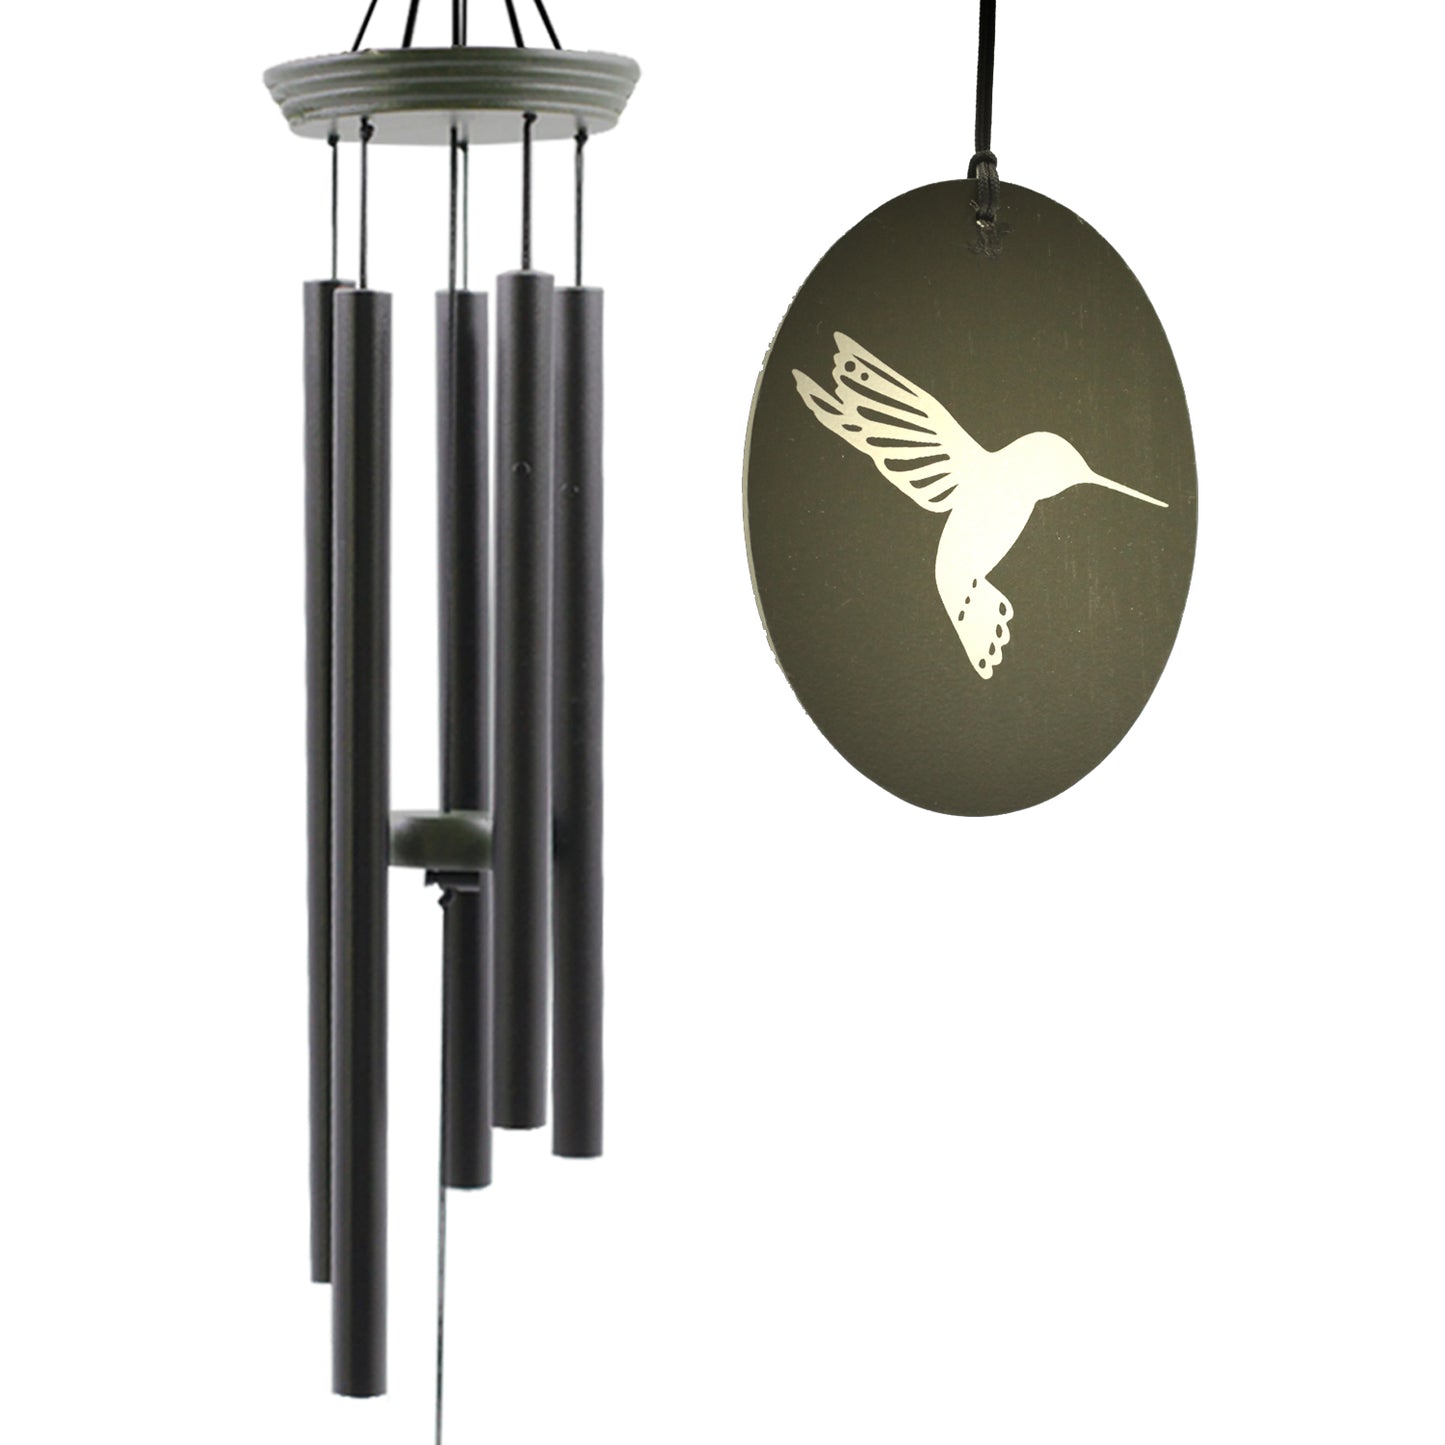 Hummingbird Wind Chimes for Outside, Windchimes Outdoor Tuned Soothing Melody, Memorial Wind Chimes Hummingbird Gifts for Mom/Grandma,Wind Chimes Outdoor Decoration, Patio, Garden, Yard